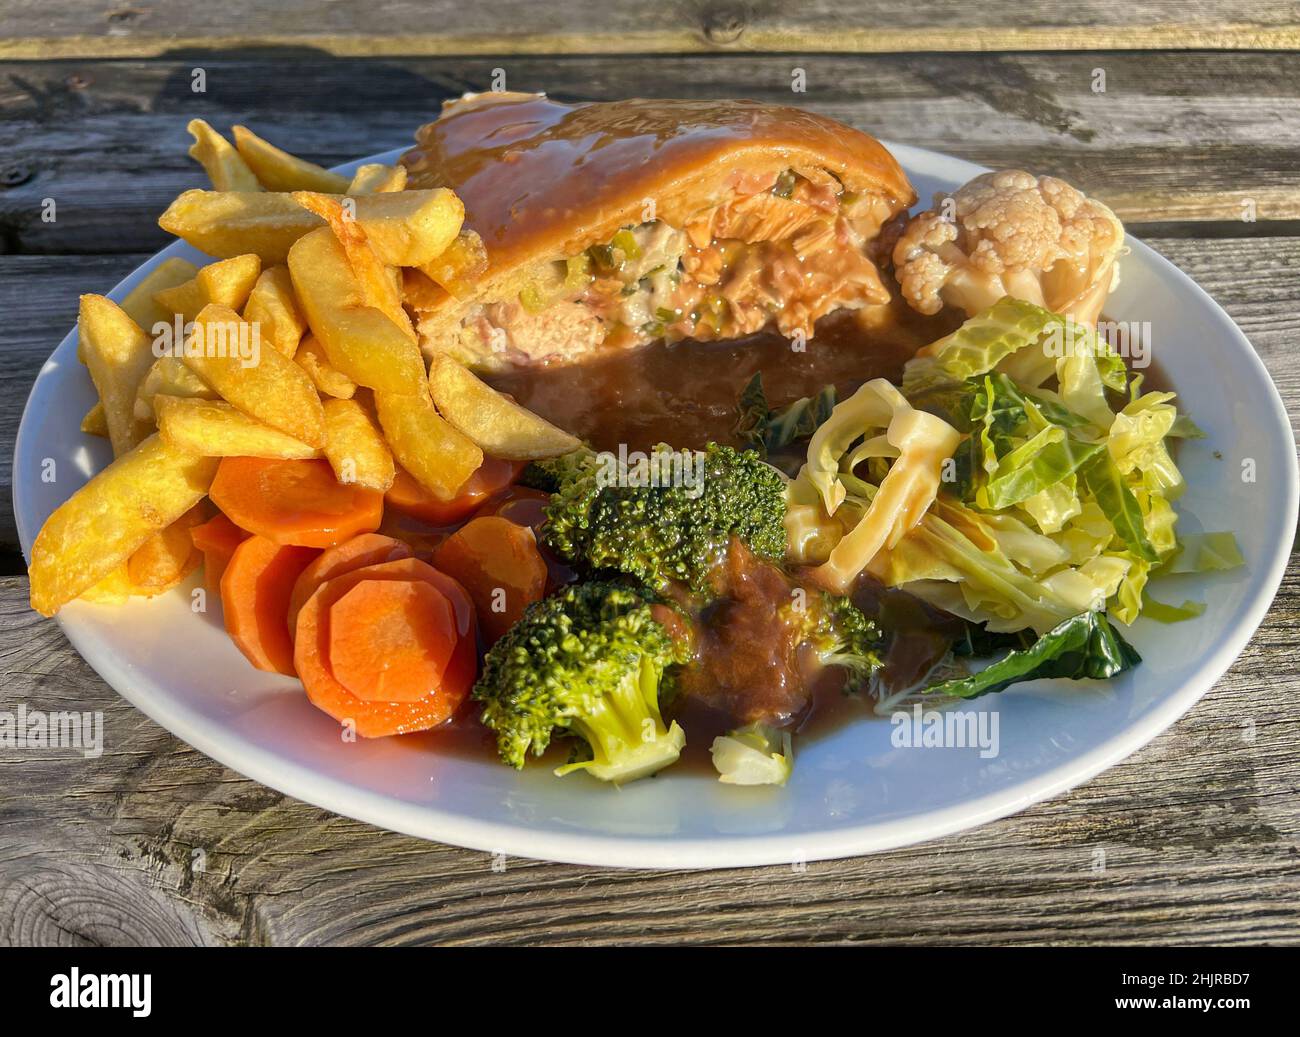 Slice of chicken and ham pie with fries, vegetables and gravy dinner Stock Photo